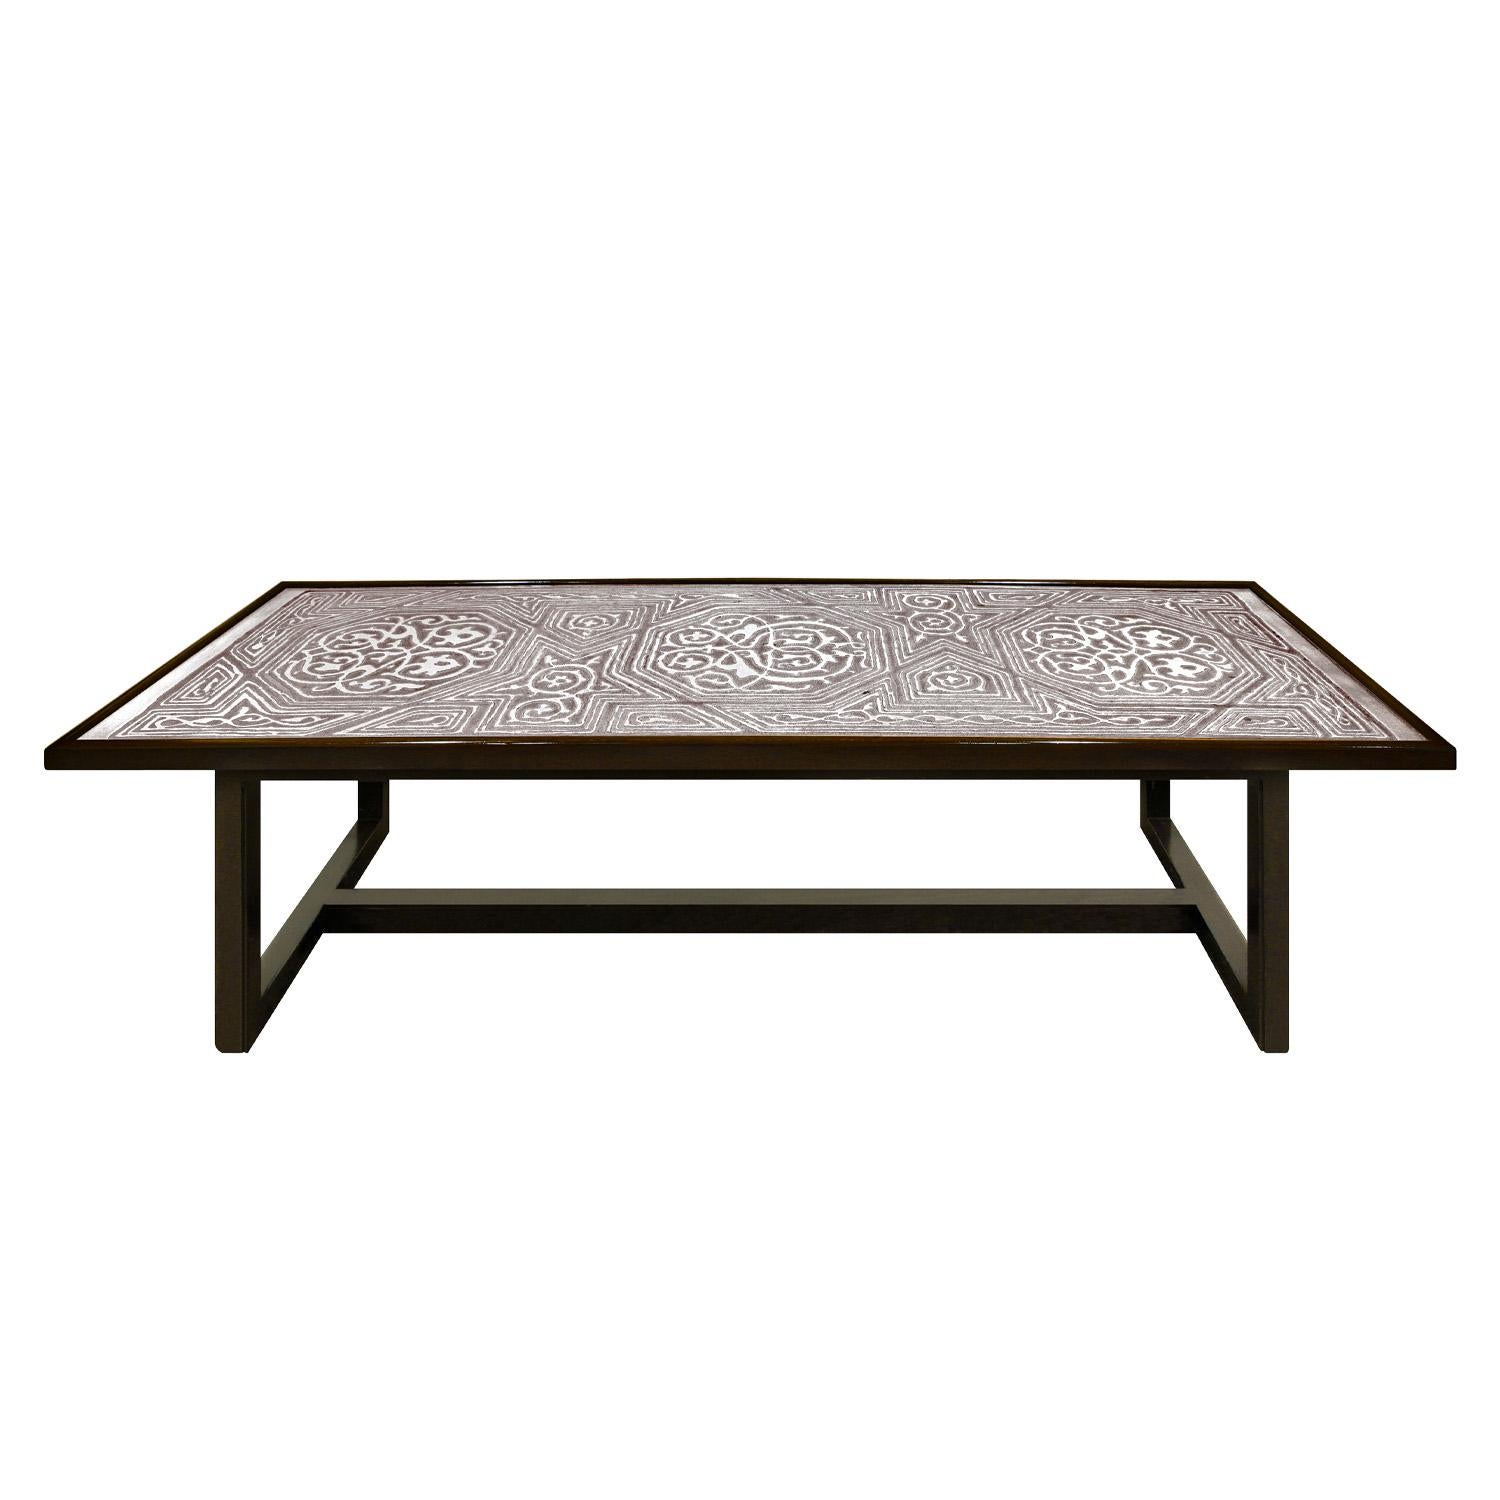 Mid-Century Modern Harvey Probber Rare Etched Pewter Top Coffee Table 1950s For Sale